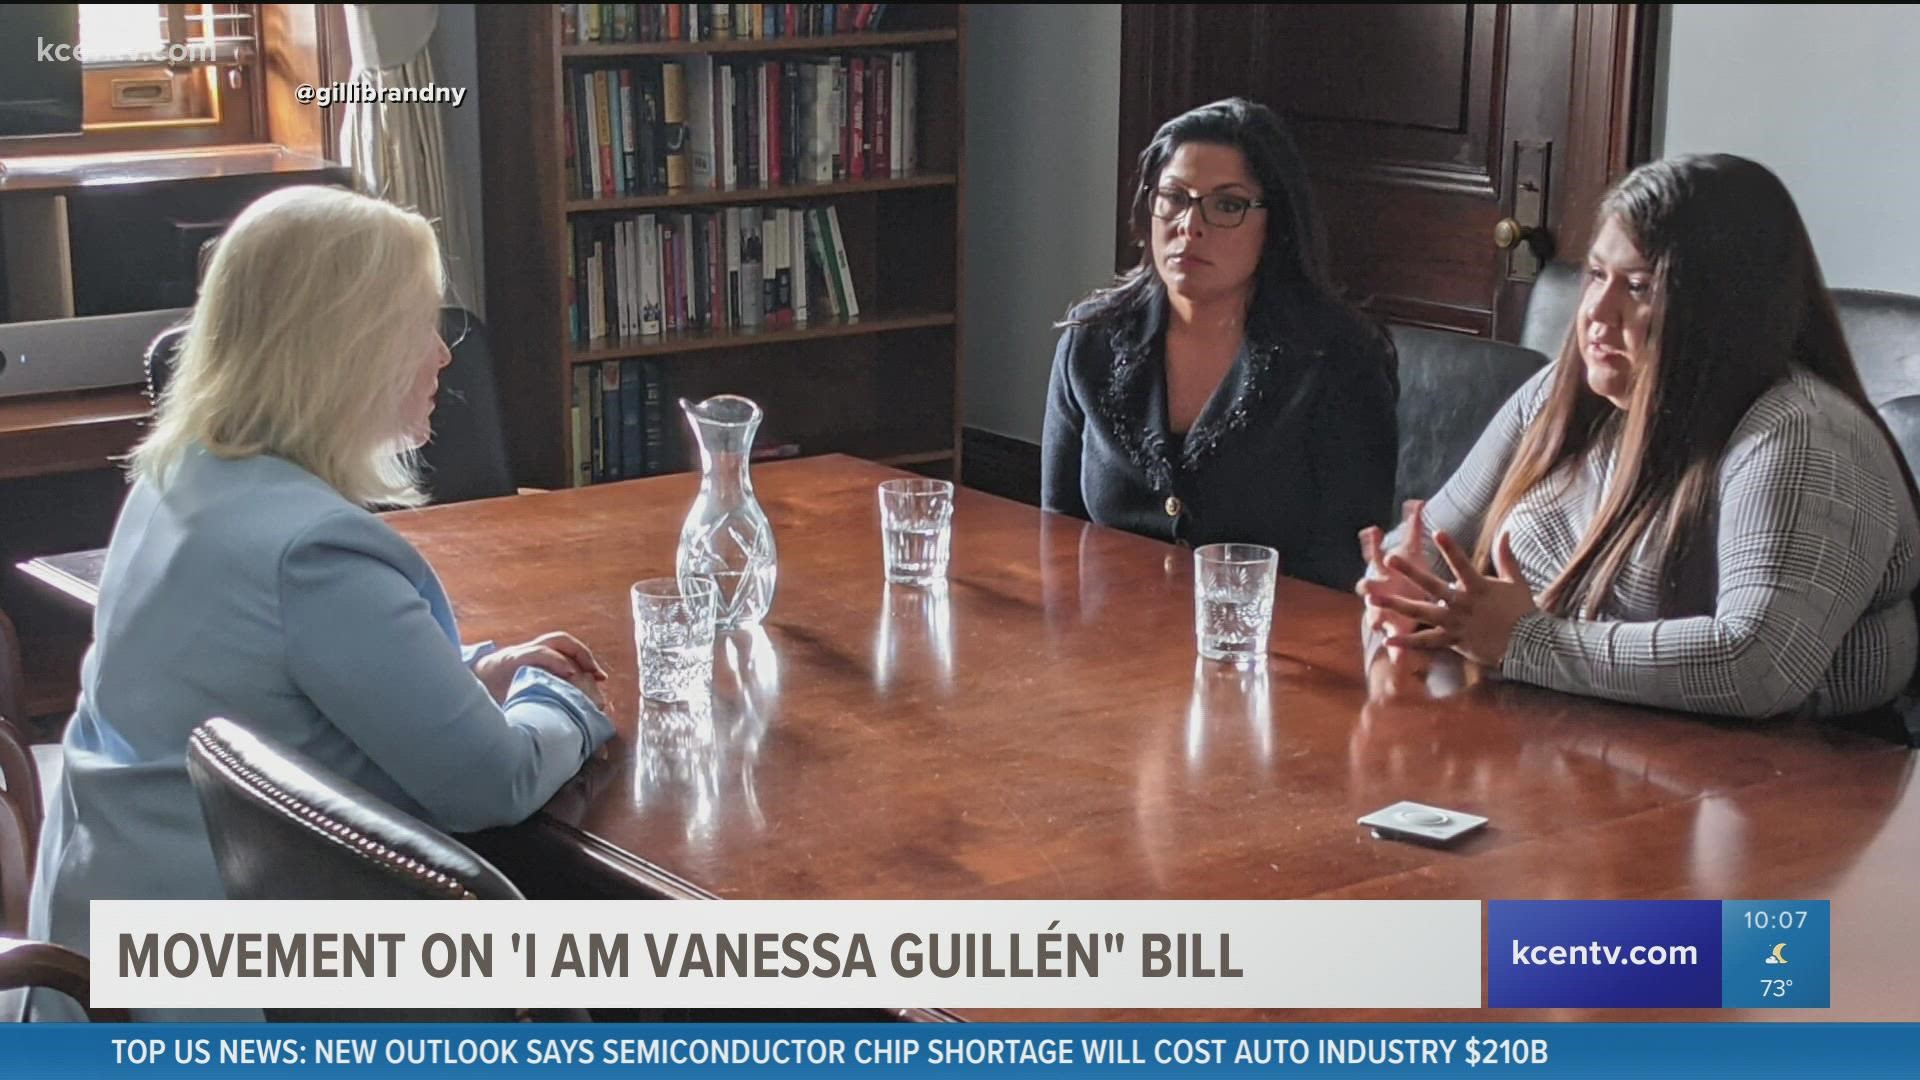 Spc. Vanessa Guillen's family and their attorney met with lawmakers about the bill, which aims to improve how reports of sexual violence are handled in the military.